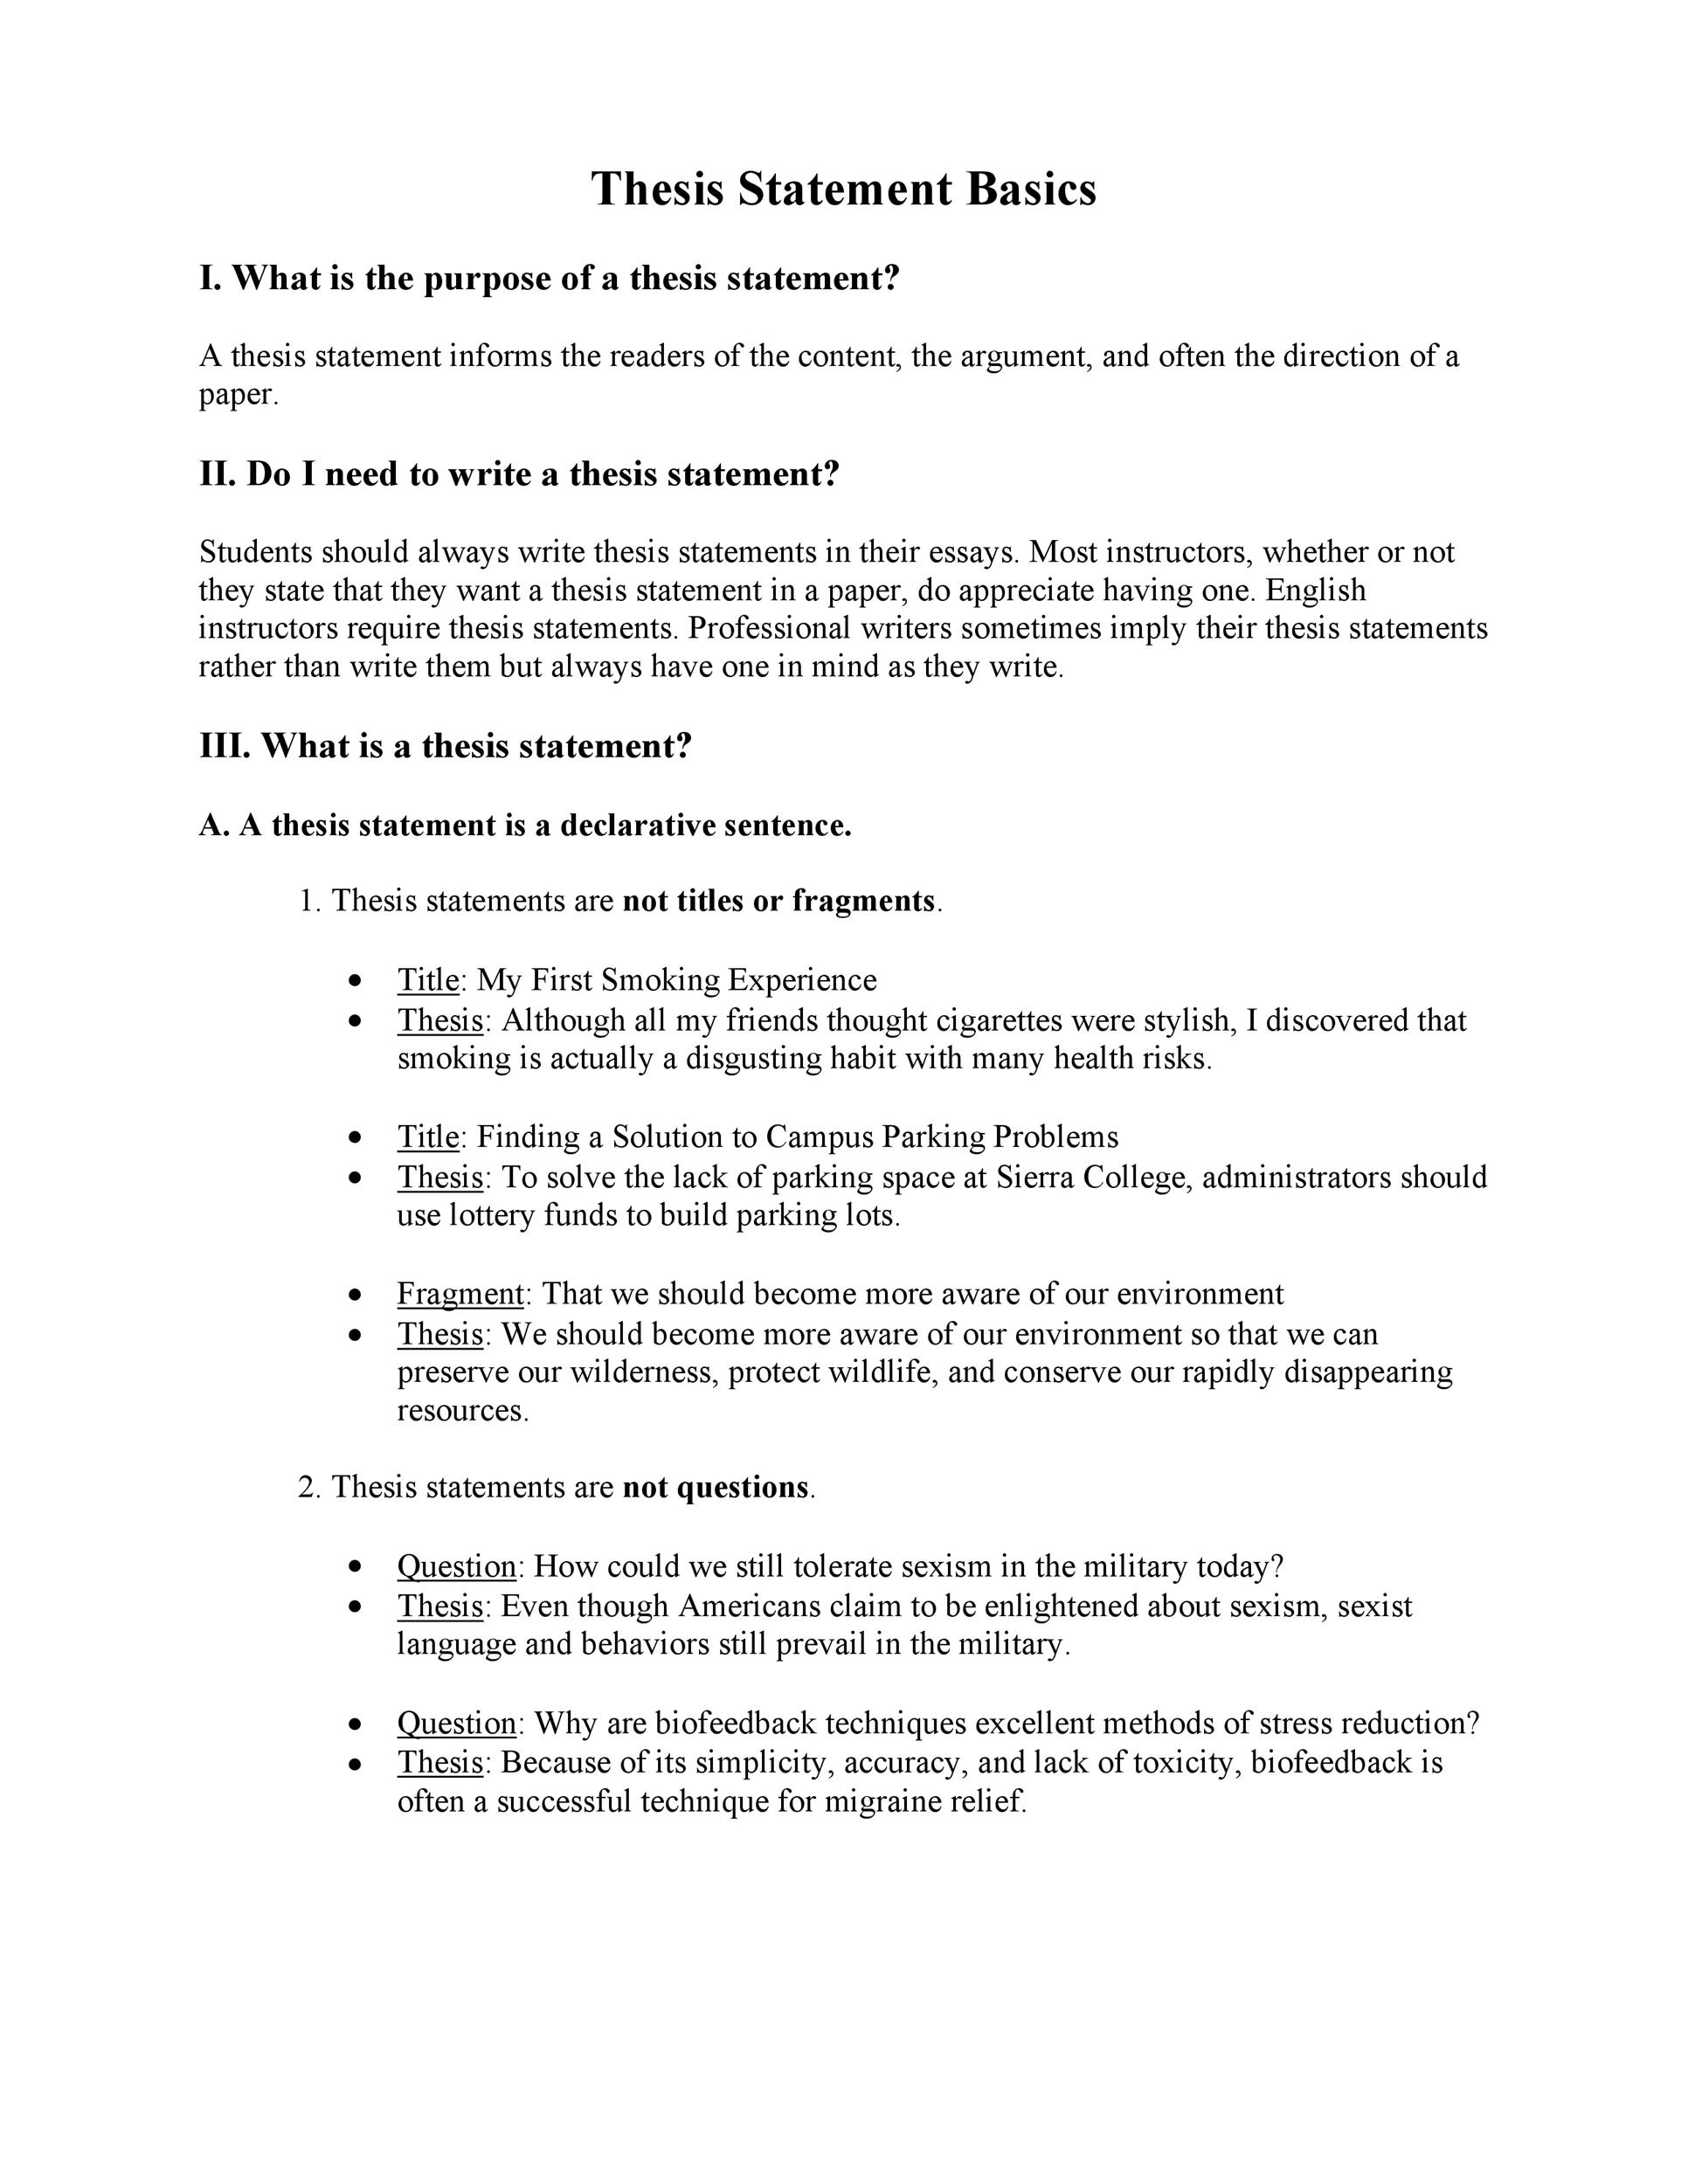 Research paper assignment rubric